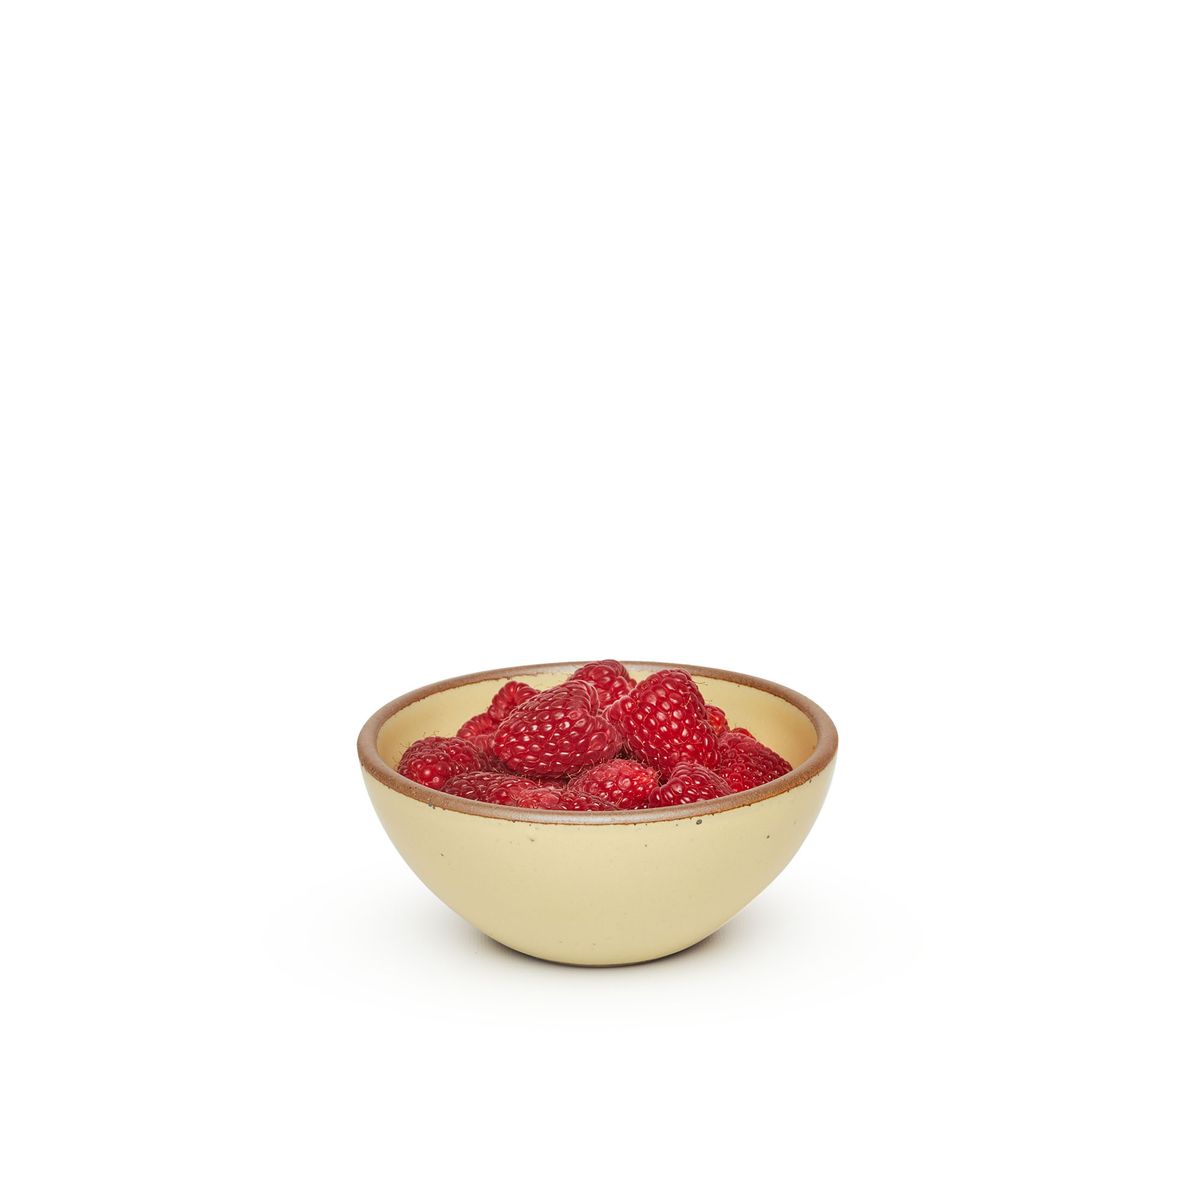 A small dessert sized rounded ceramic bowl in a light butter yellow color featuring iron speckles and an unglazed rim, filled with strawberries